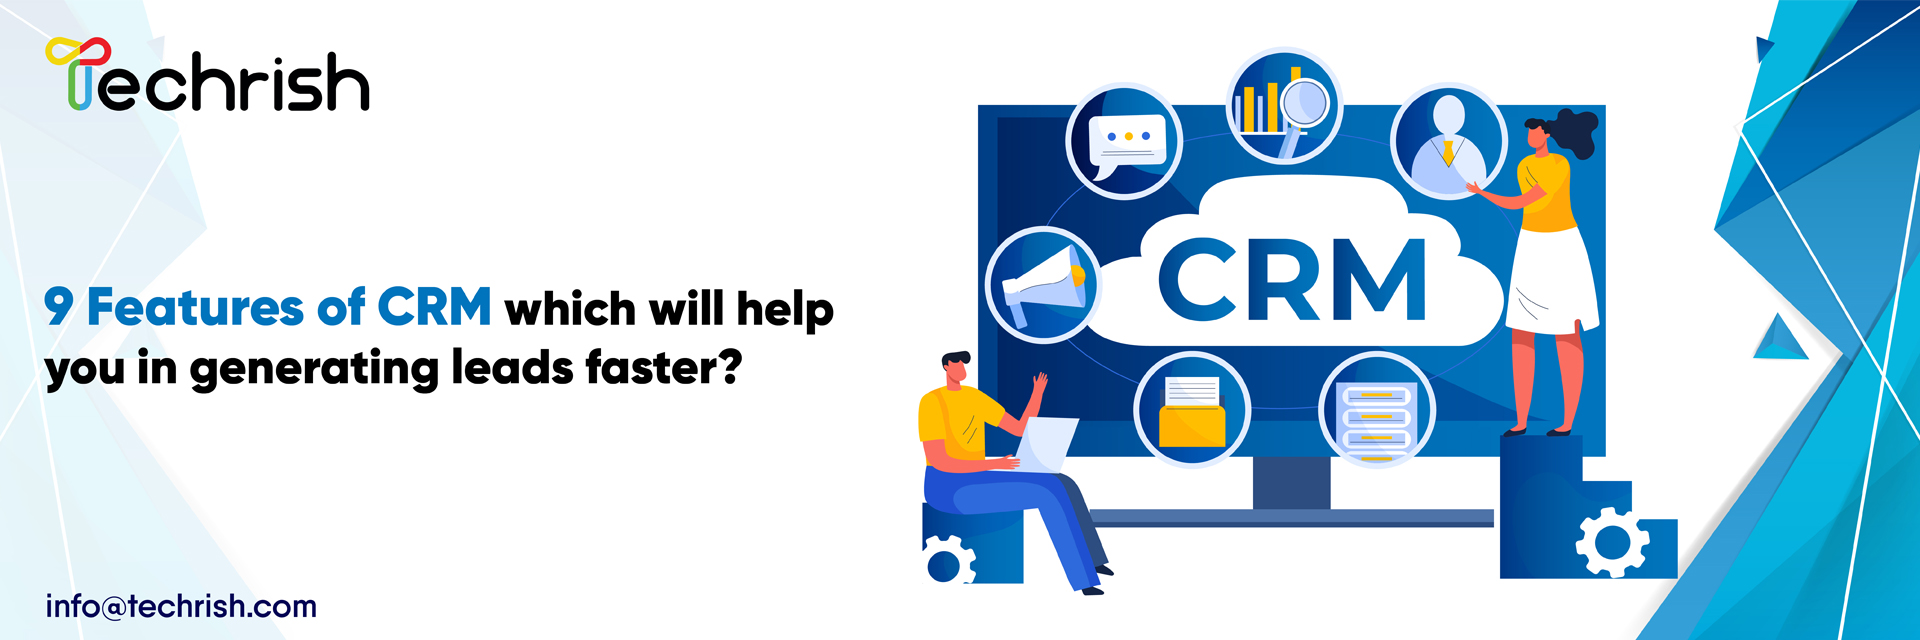 9 features of CRM which will help you in generating leads faster?